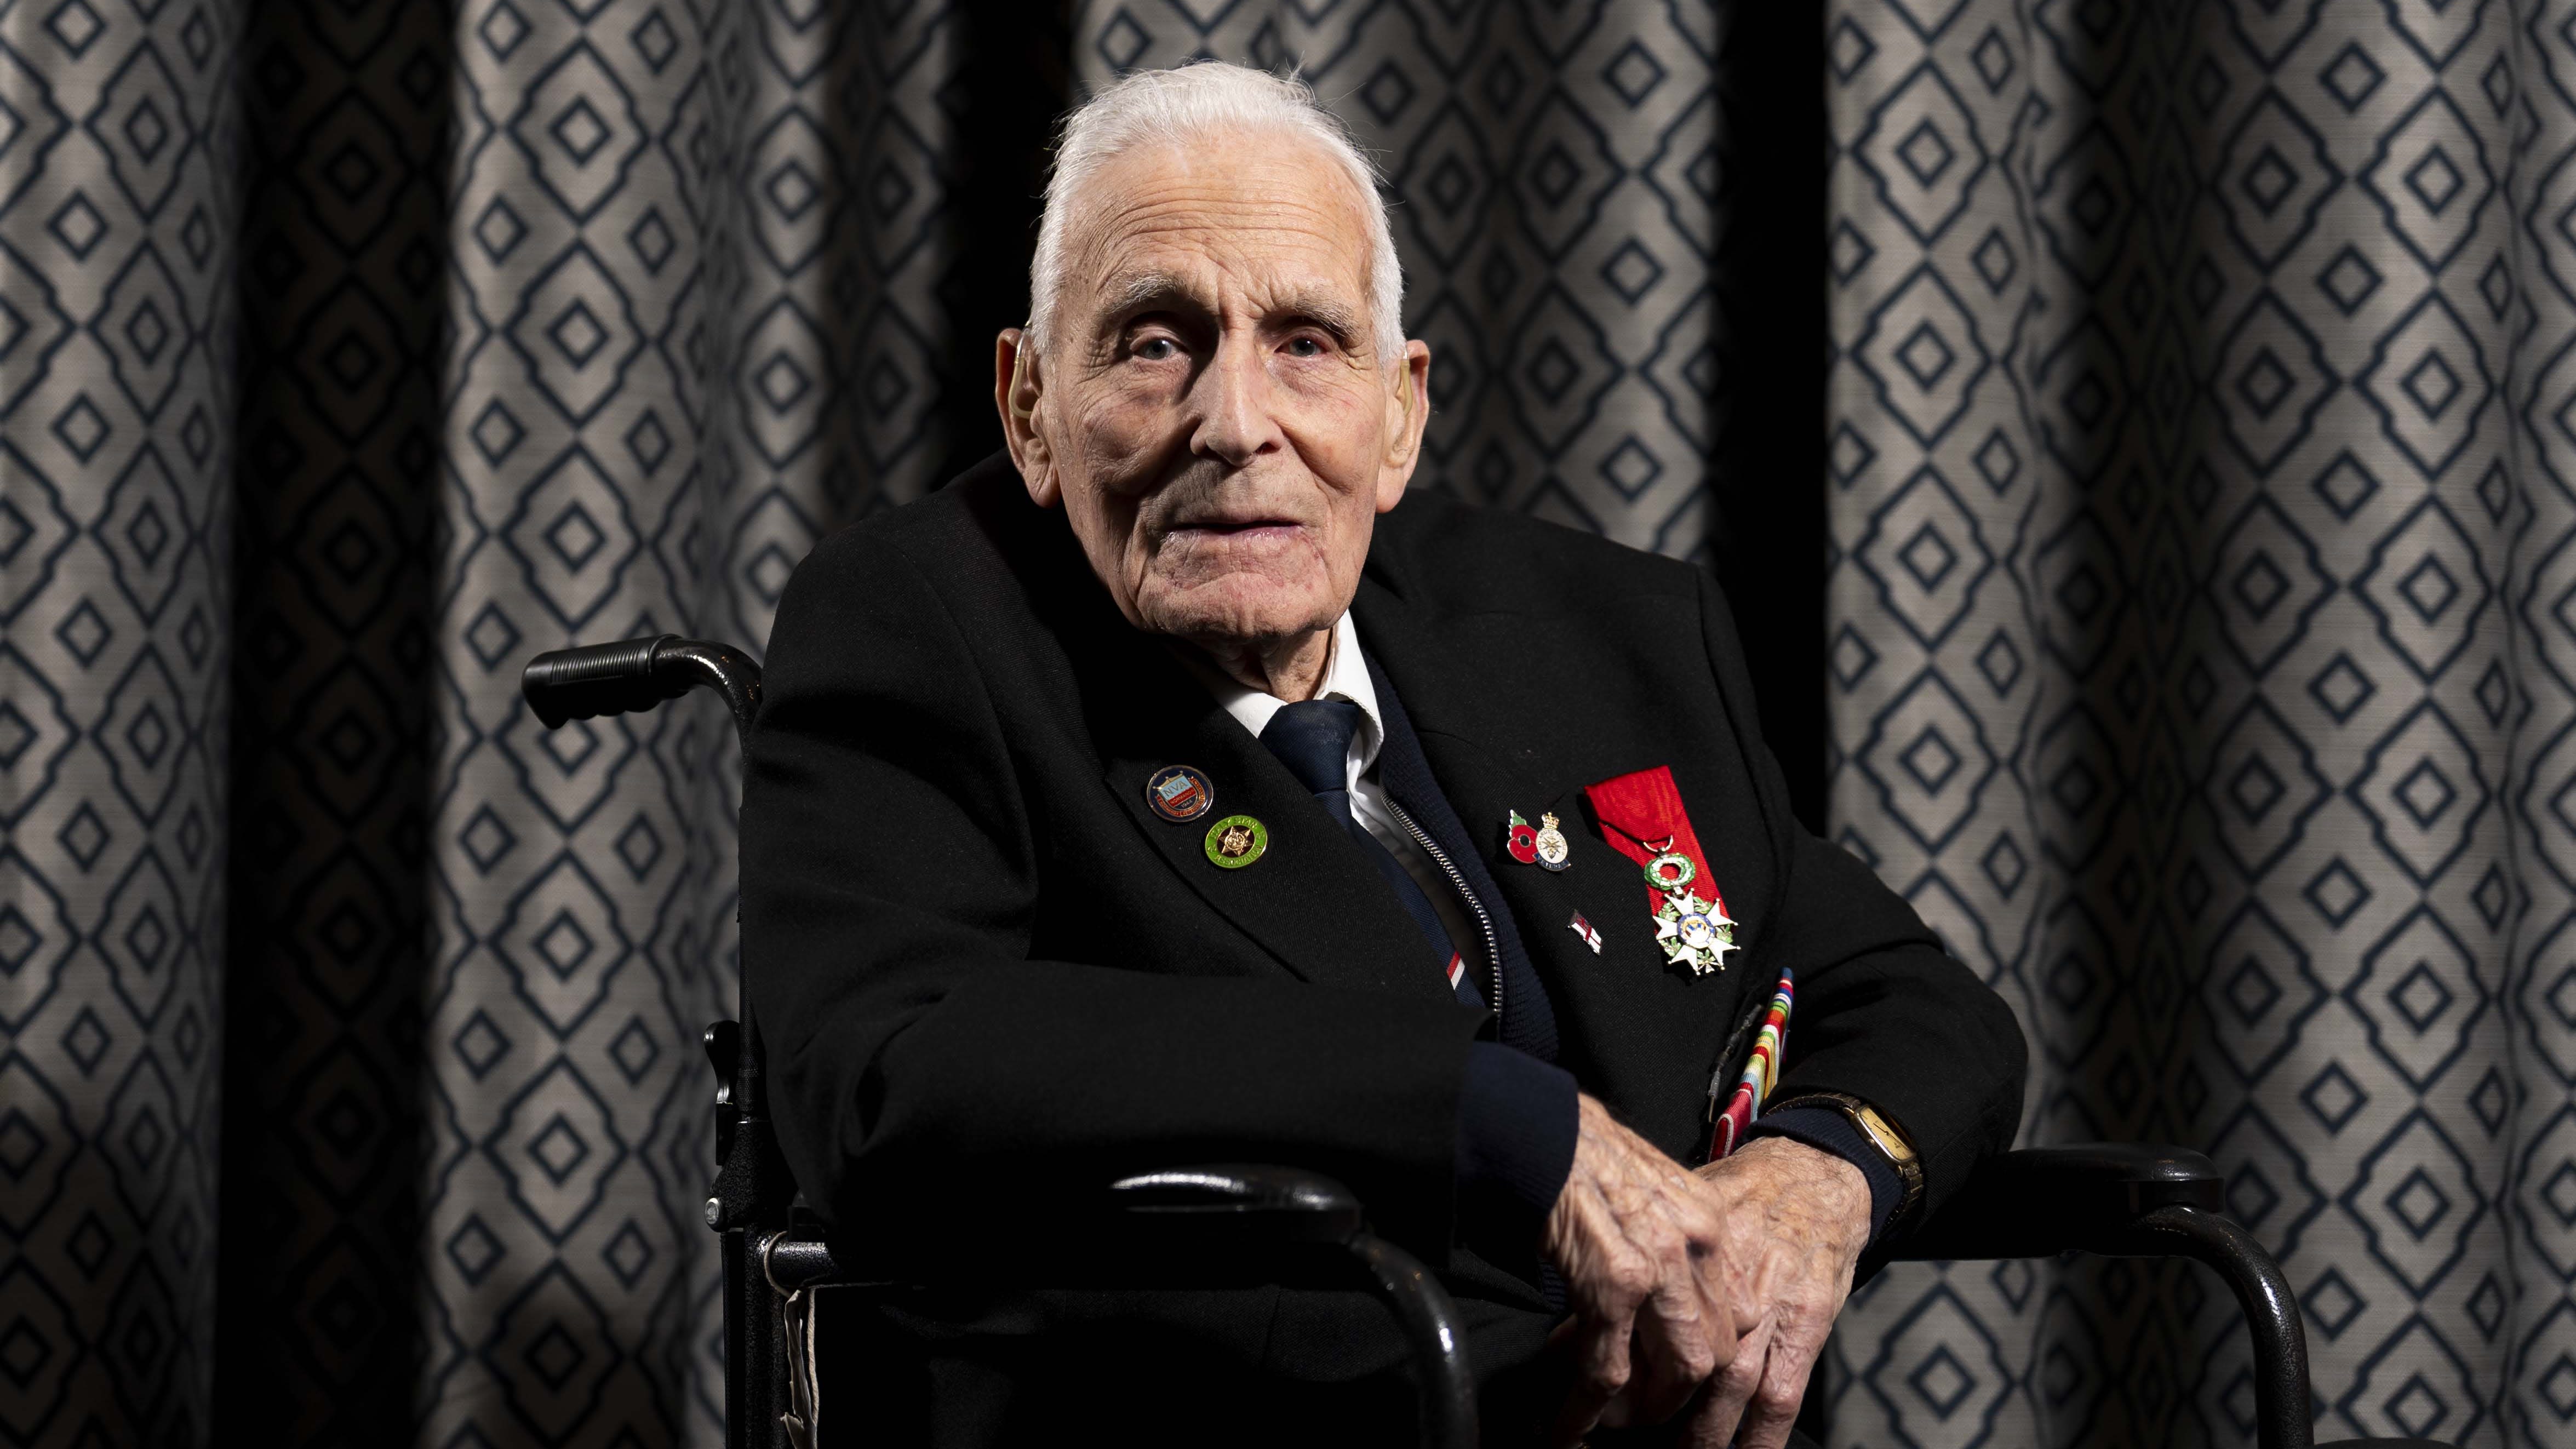 Veteran, 99, recalls ‘unbelievable’ sight of ships sailing to Normandy on D-Day